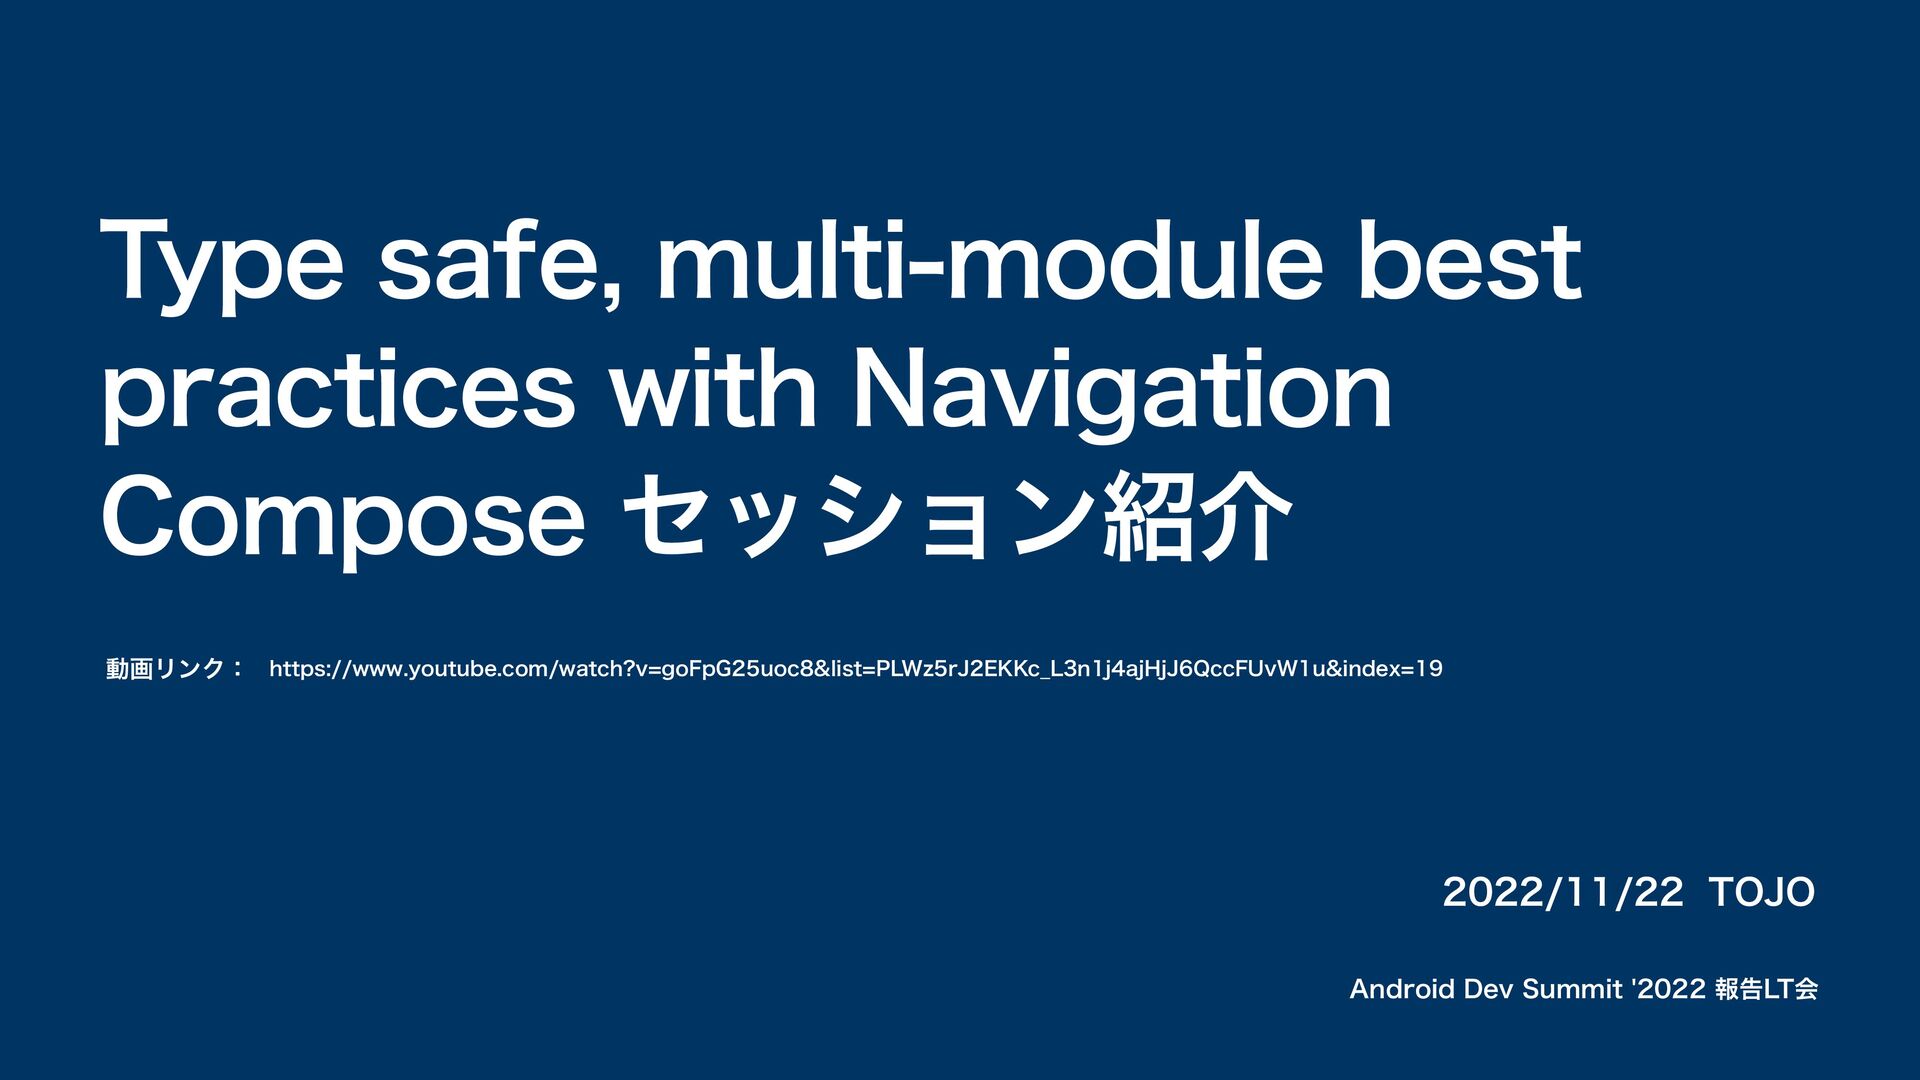 Slide Top: Type safe, multi-module best practices with Navigation Compose 動画紹介 ＠Android Dev Summit '22 報告LT会